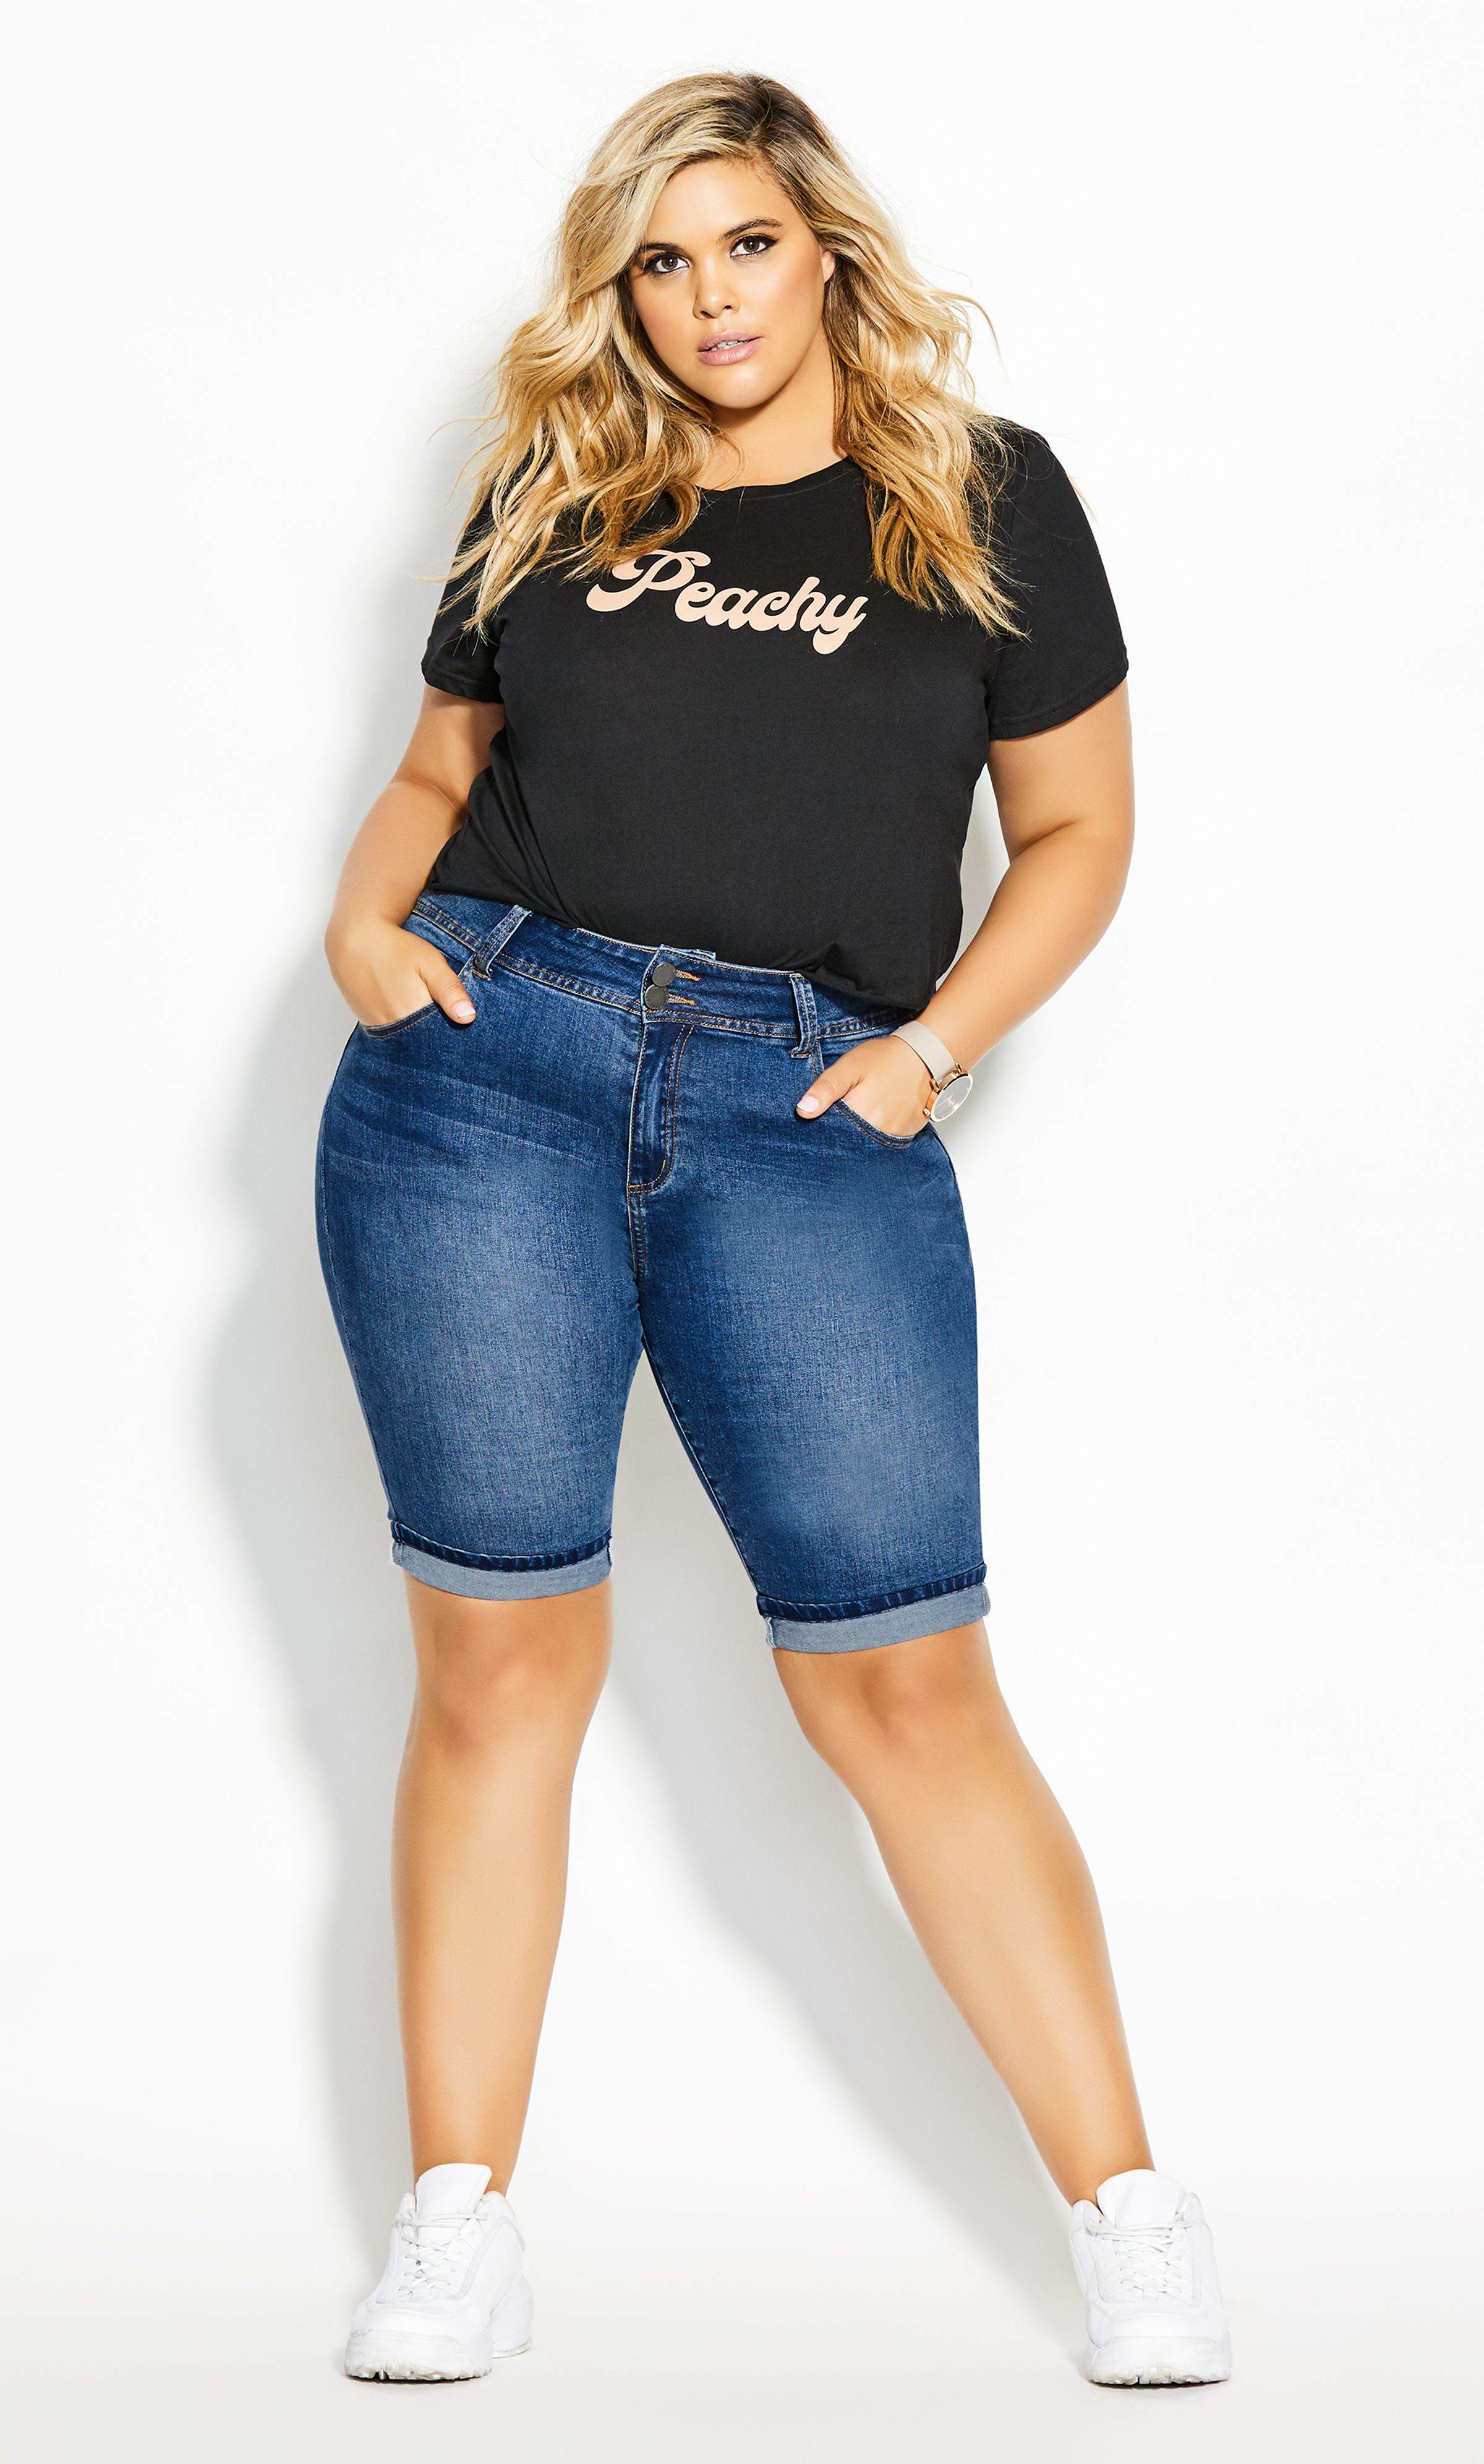 A denim essential every curvy woman needs, the Killer Pins Short are made from a stretch denim fabrication that will feel like a second skin on your curves. Add this timeless style to your wardrobe for endless casual styling possibilities! Key feature includes: - High rise - Double button and zip fastening - Belt looped waistline - Classic 5 pocket denim styling with flap back pockets - Dark denim wash - Knee length - Rolled cuff - Super stretch denim fabrication Team these shorts with a pair of white runners and a cropped jumper for a cute finish!